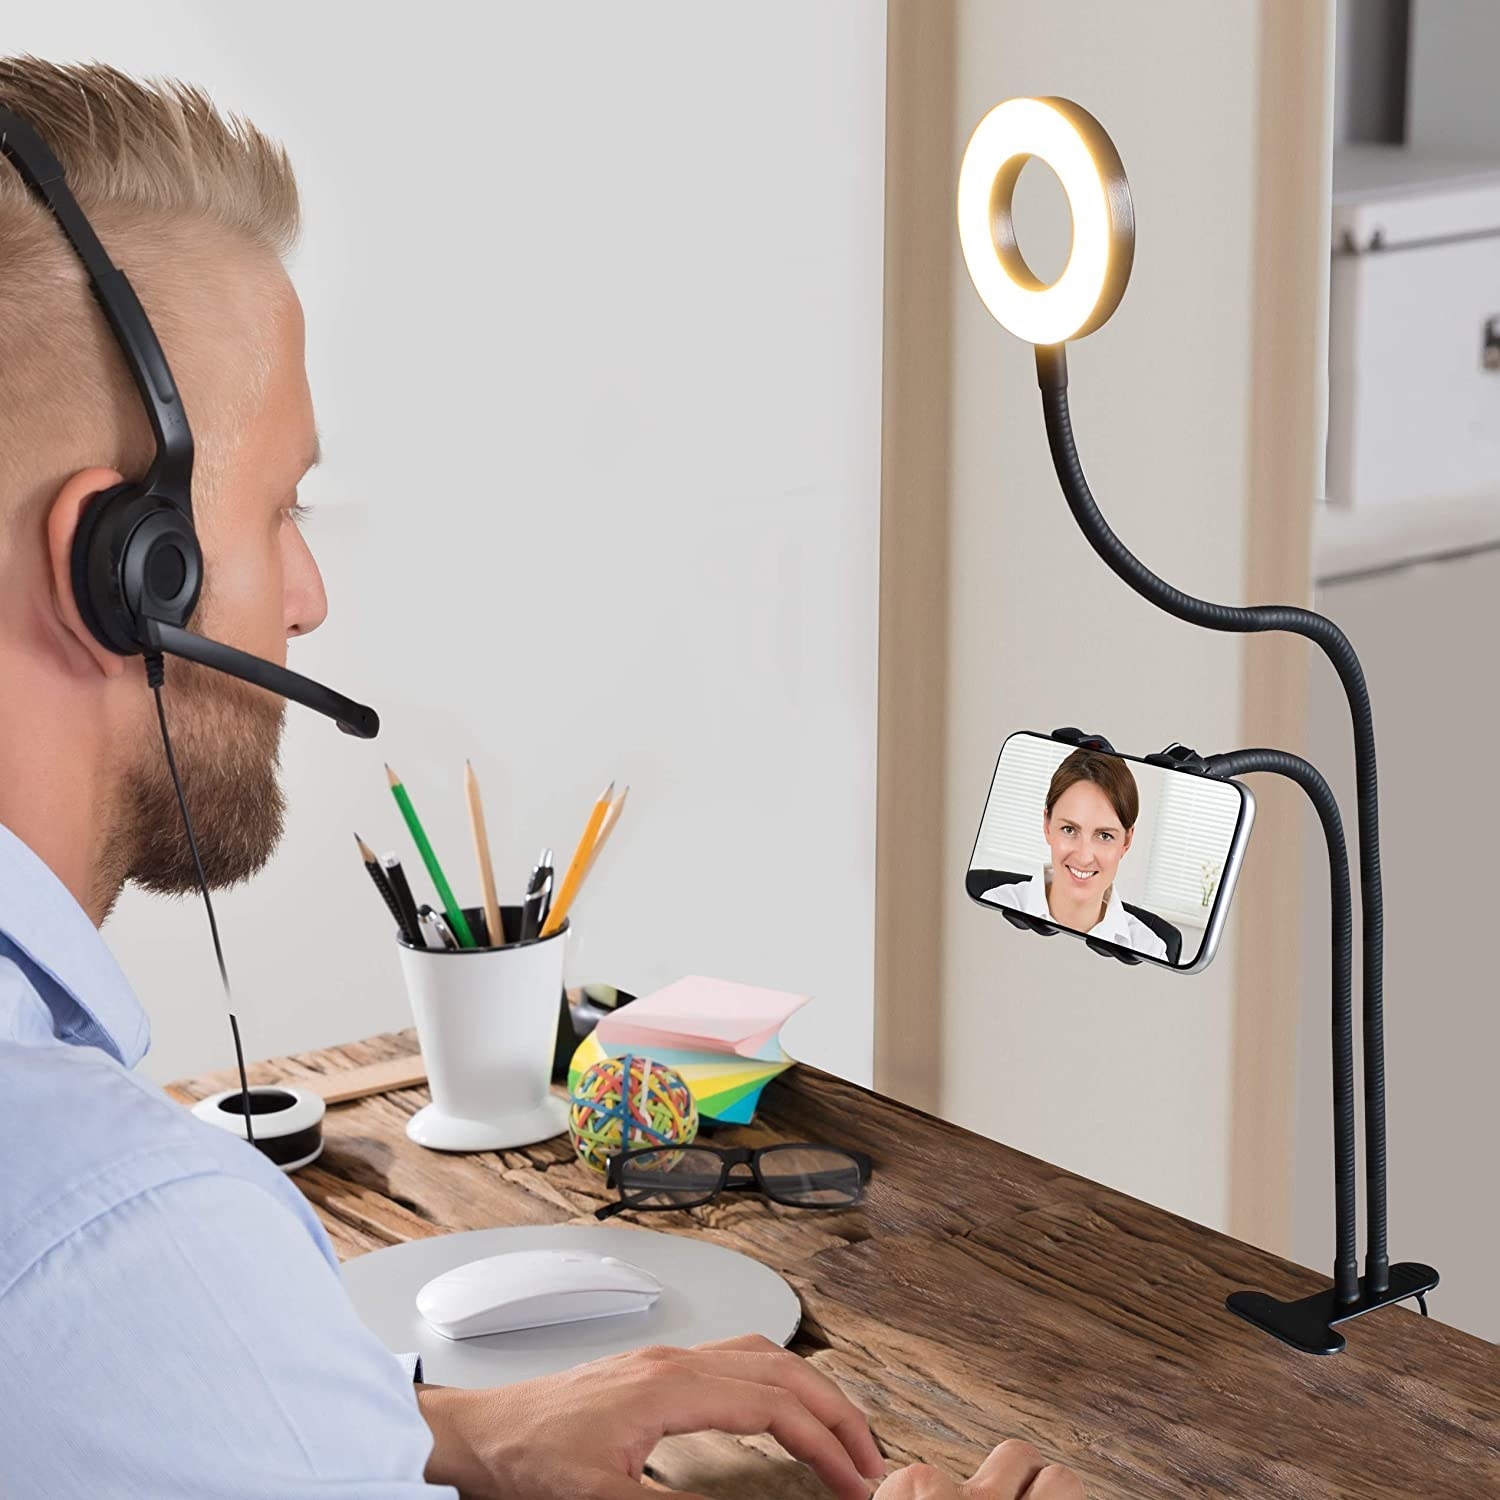 a person using the ring light phone holder at a desk